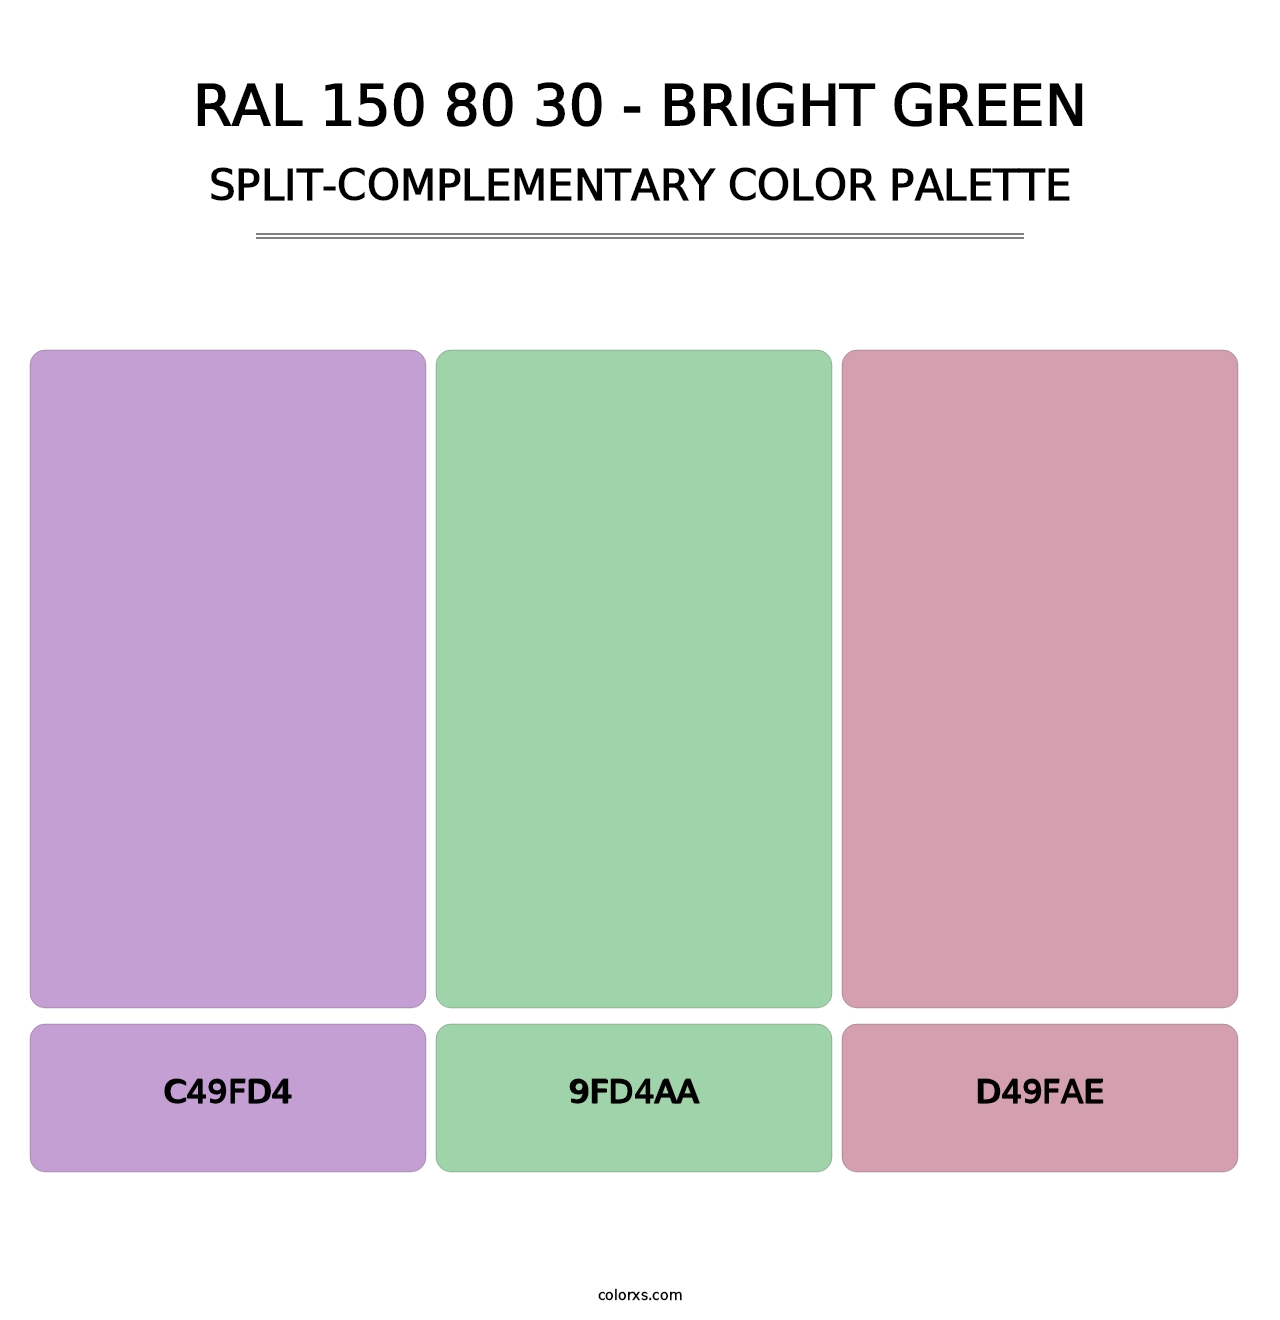 RAL 150 80 30 - Bright Green - Split-Complementary Color Palette